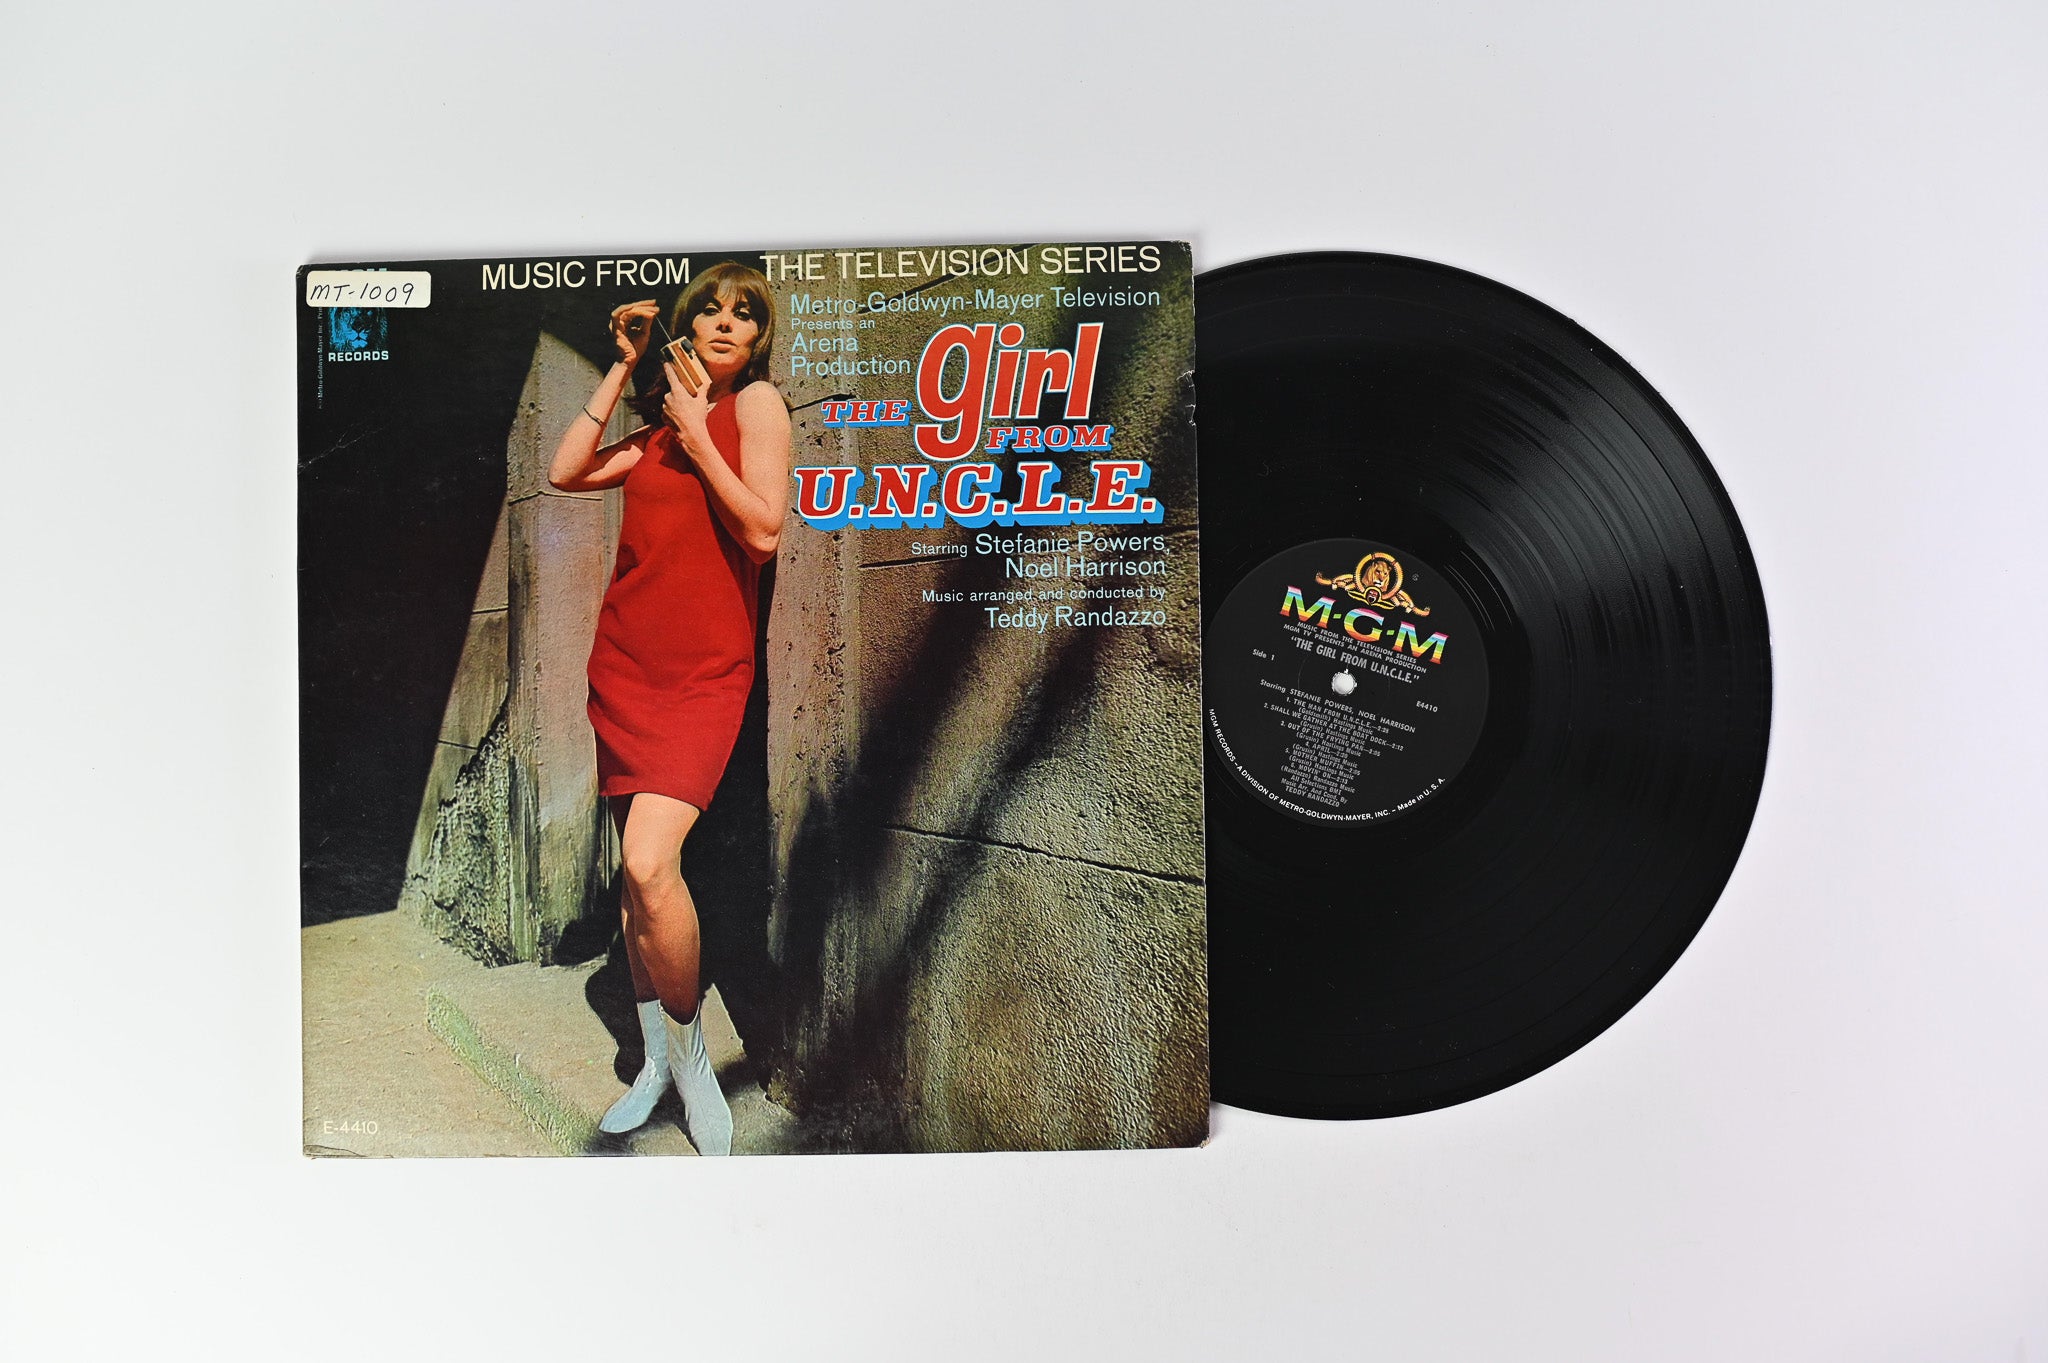 Teddy Randazzo - The Girl From U.N.C.L.E. (Music From The Television Series) on MGM Records